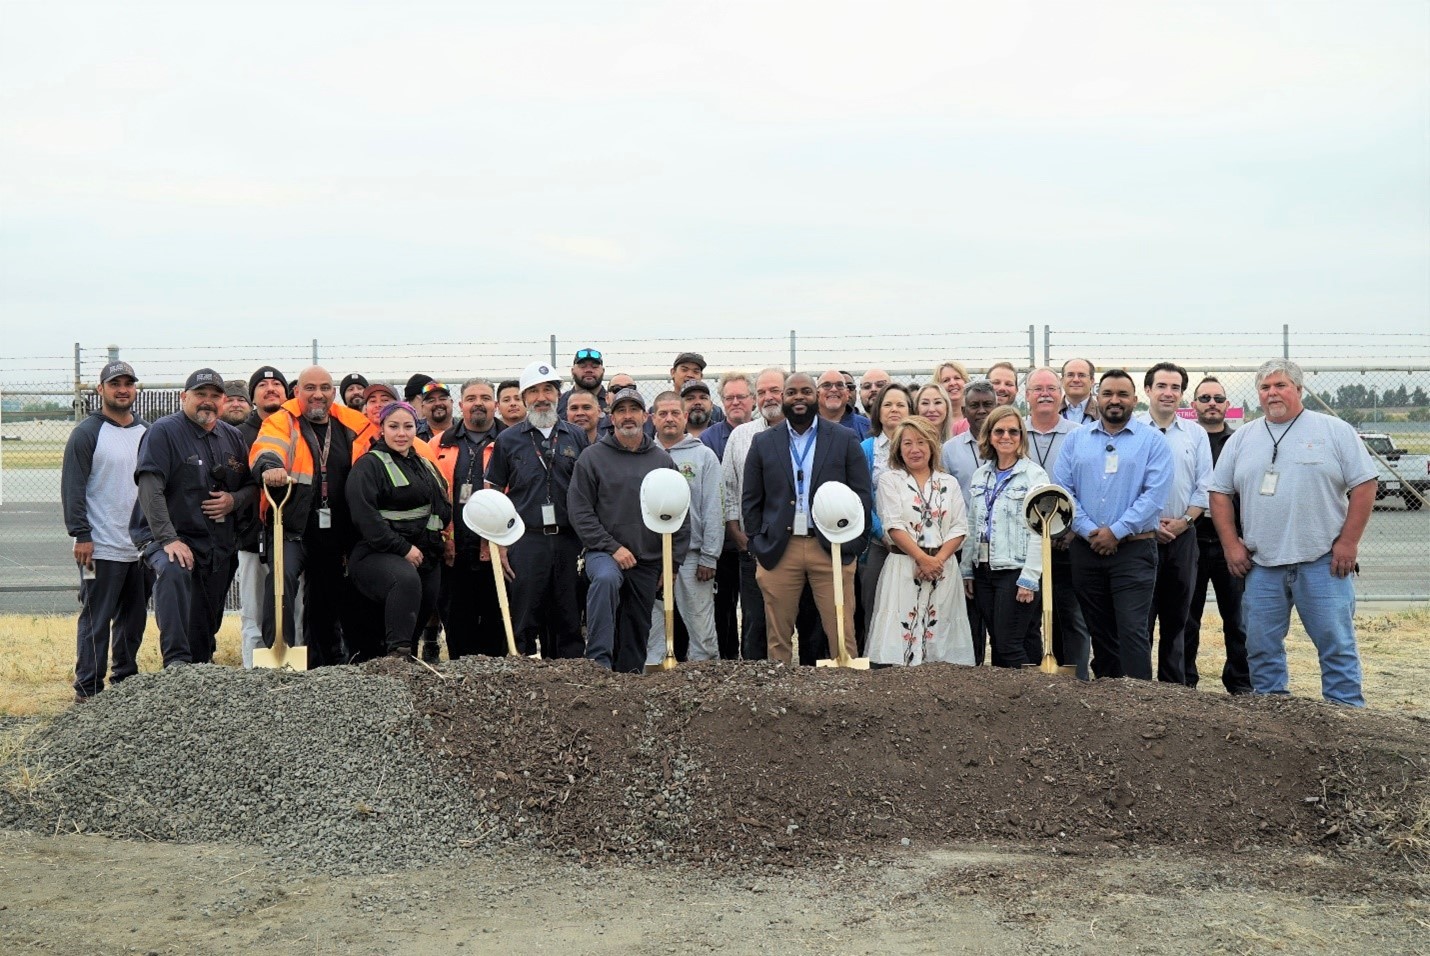 Facilities team and Senior Staff smile for photo at groundbreaking location.